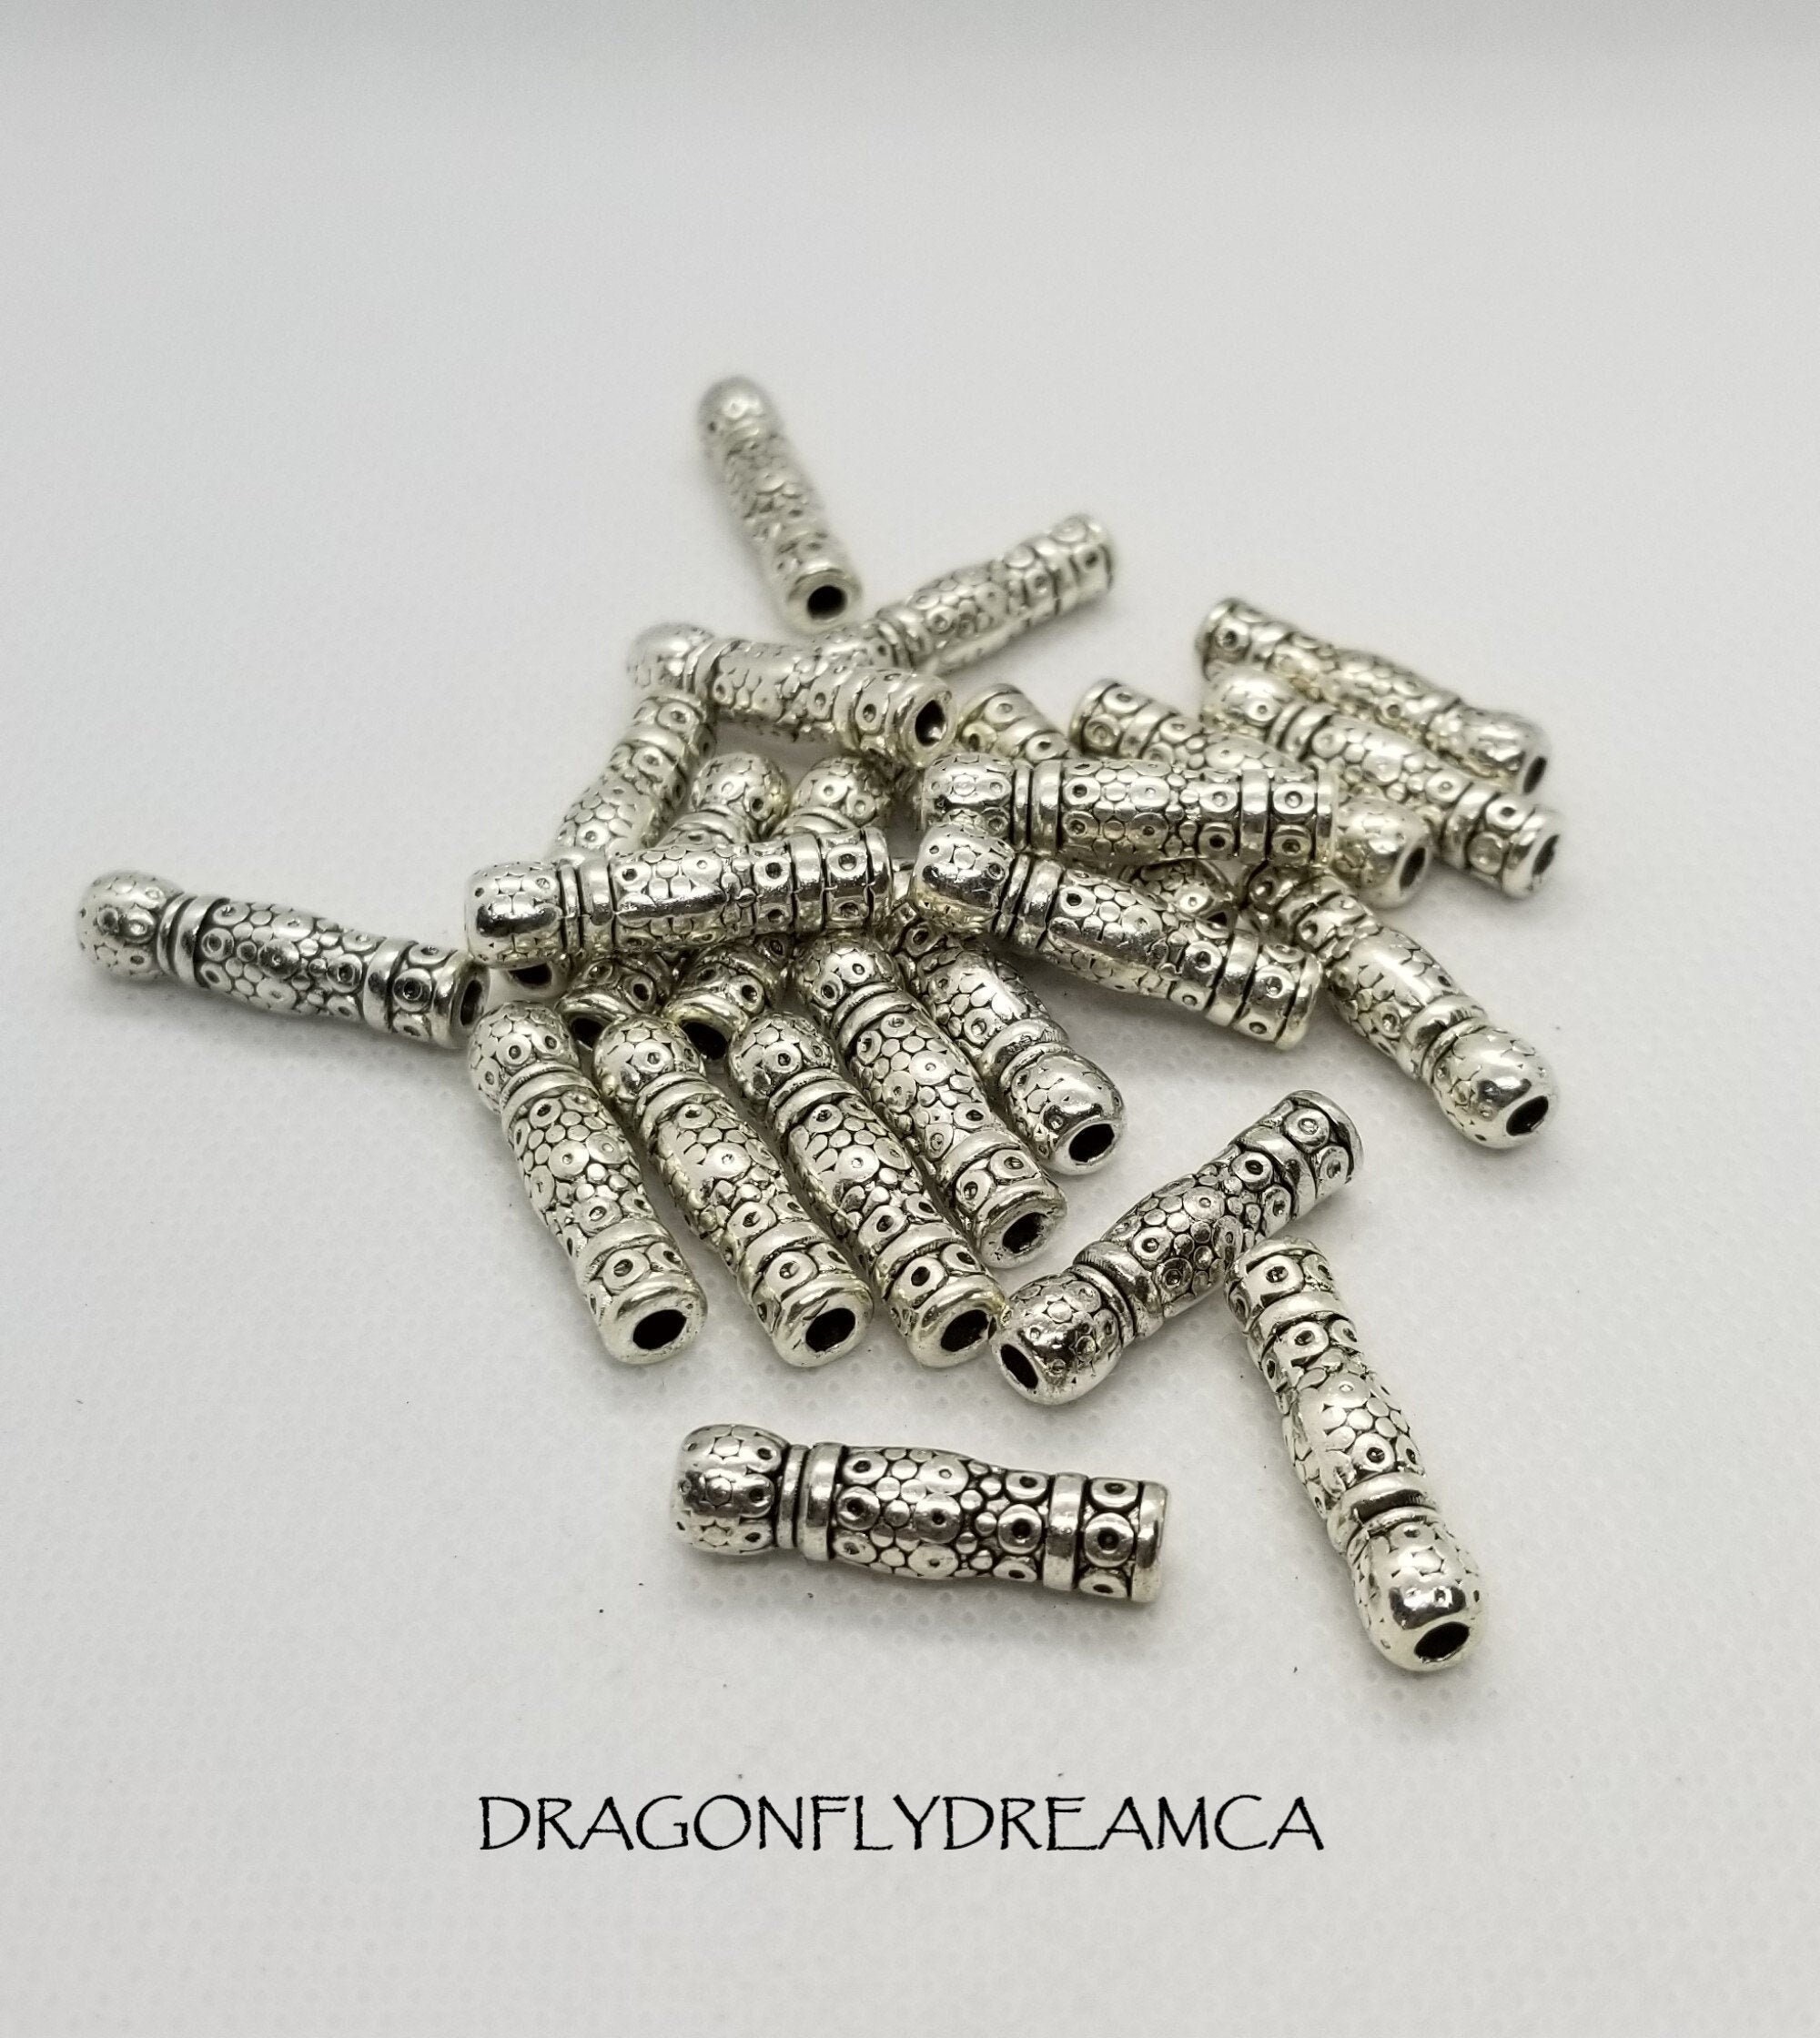 10 PACK 13mm Etched Metal Tube Beads, Etched Design, Antiqued Silver Color,  Cylinder Engraved Tube Beads, 2.5mm Hole, Modern Style 